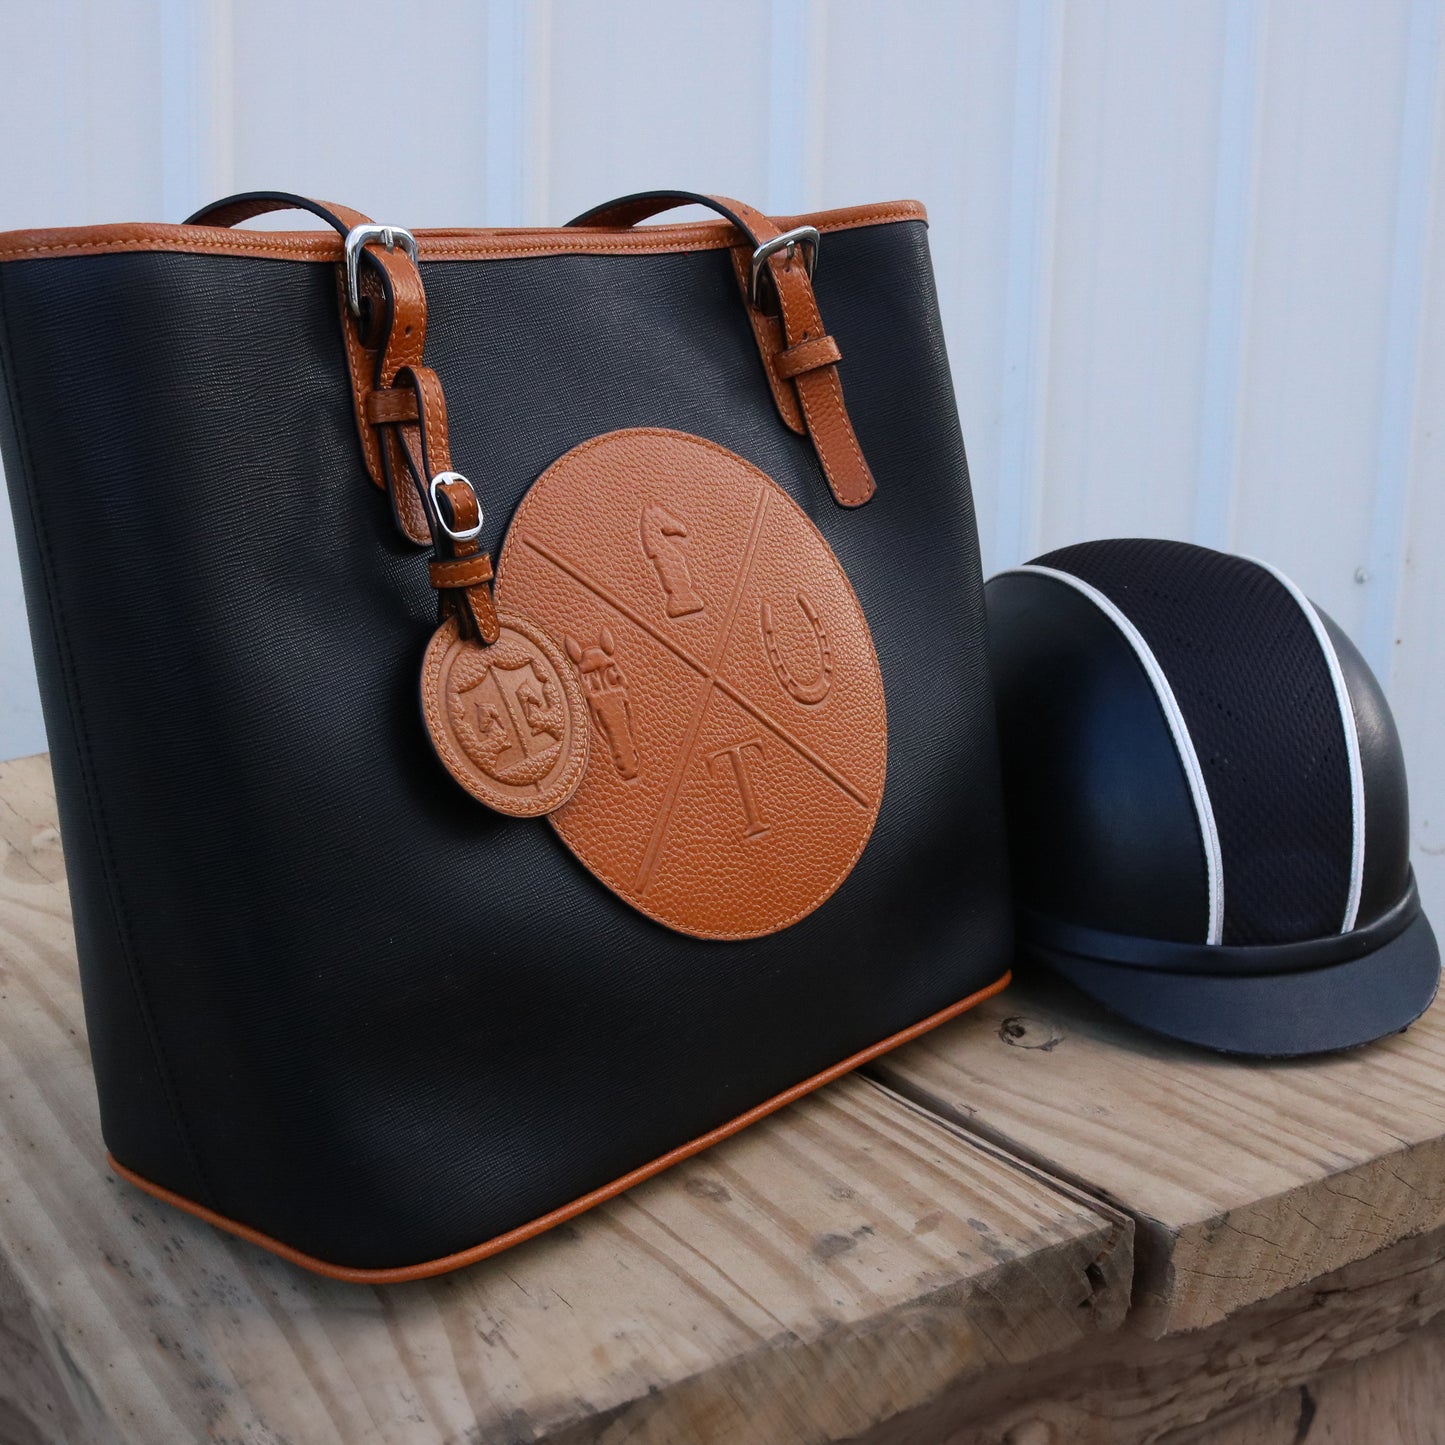 Tucker Tweed Equestrian™ James River Carry All